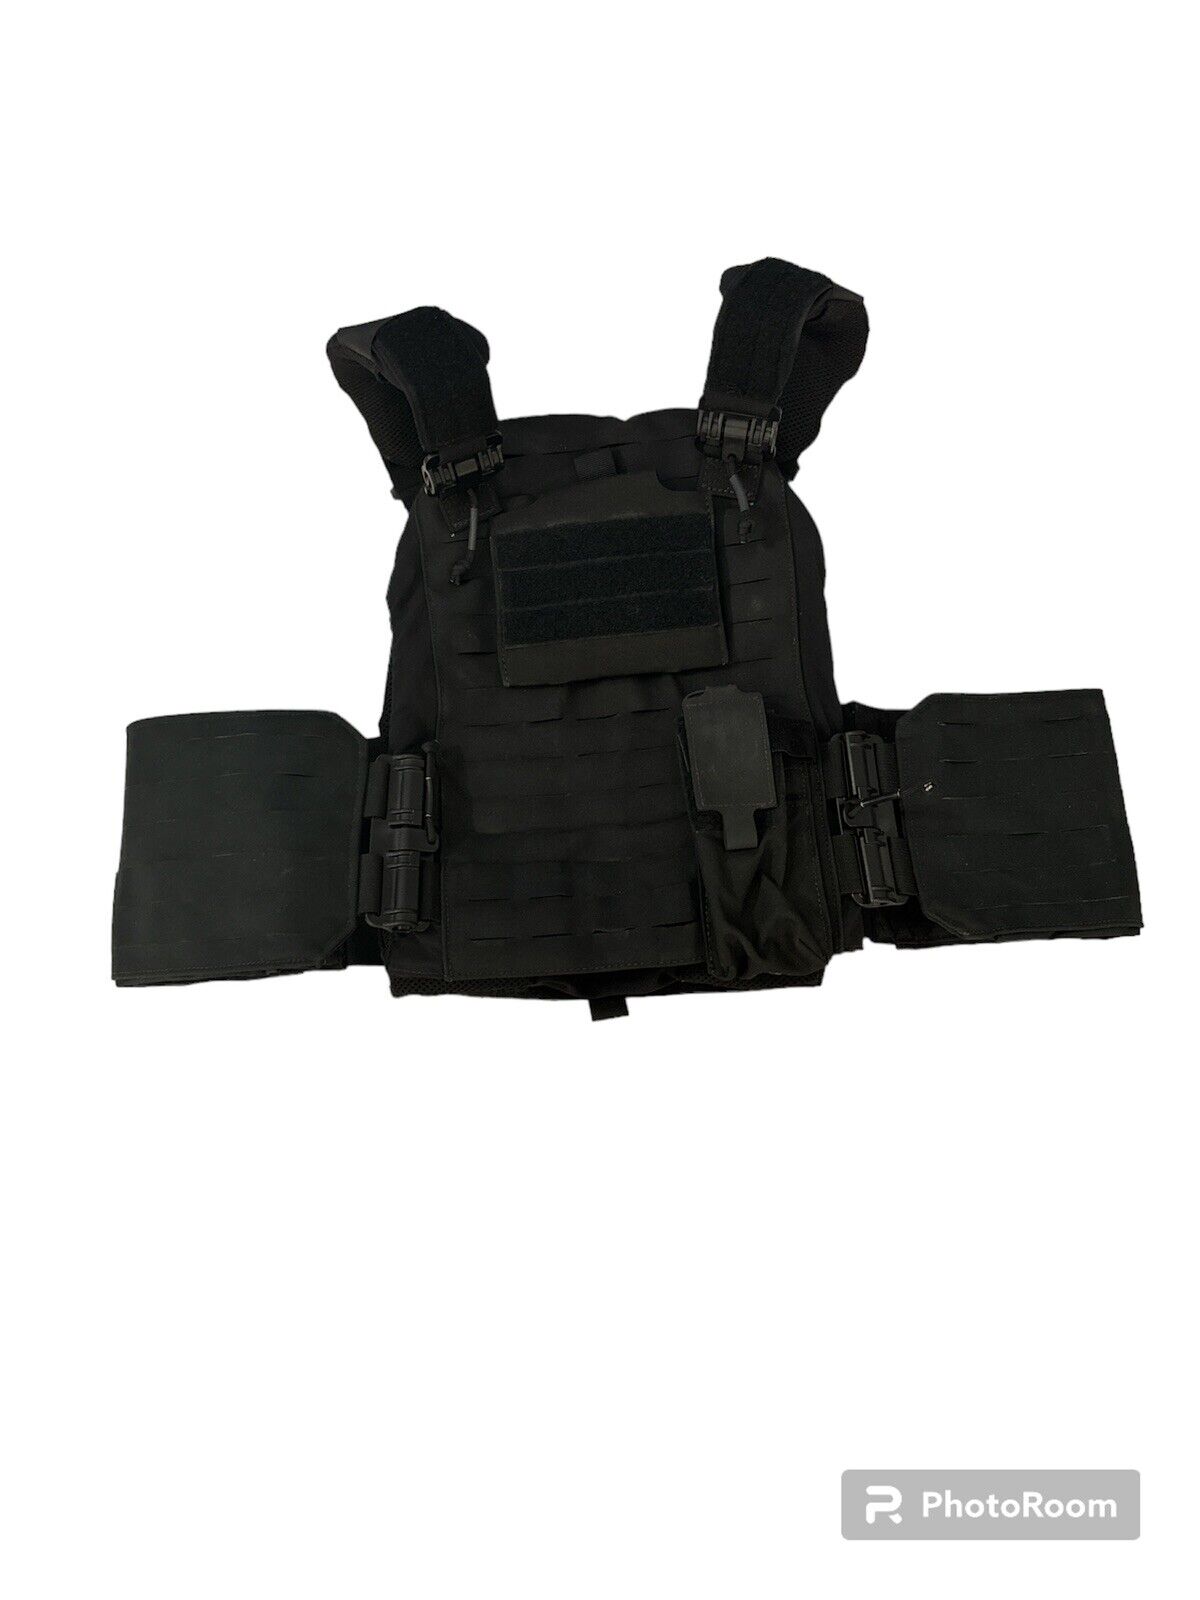 FirstSpear Strandhogg plate carrier 6/12 Tubes XL Black W/ Admin And Radio Pouch